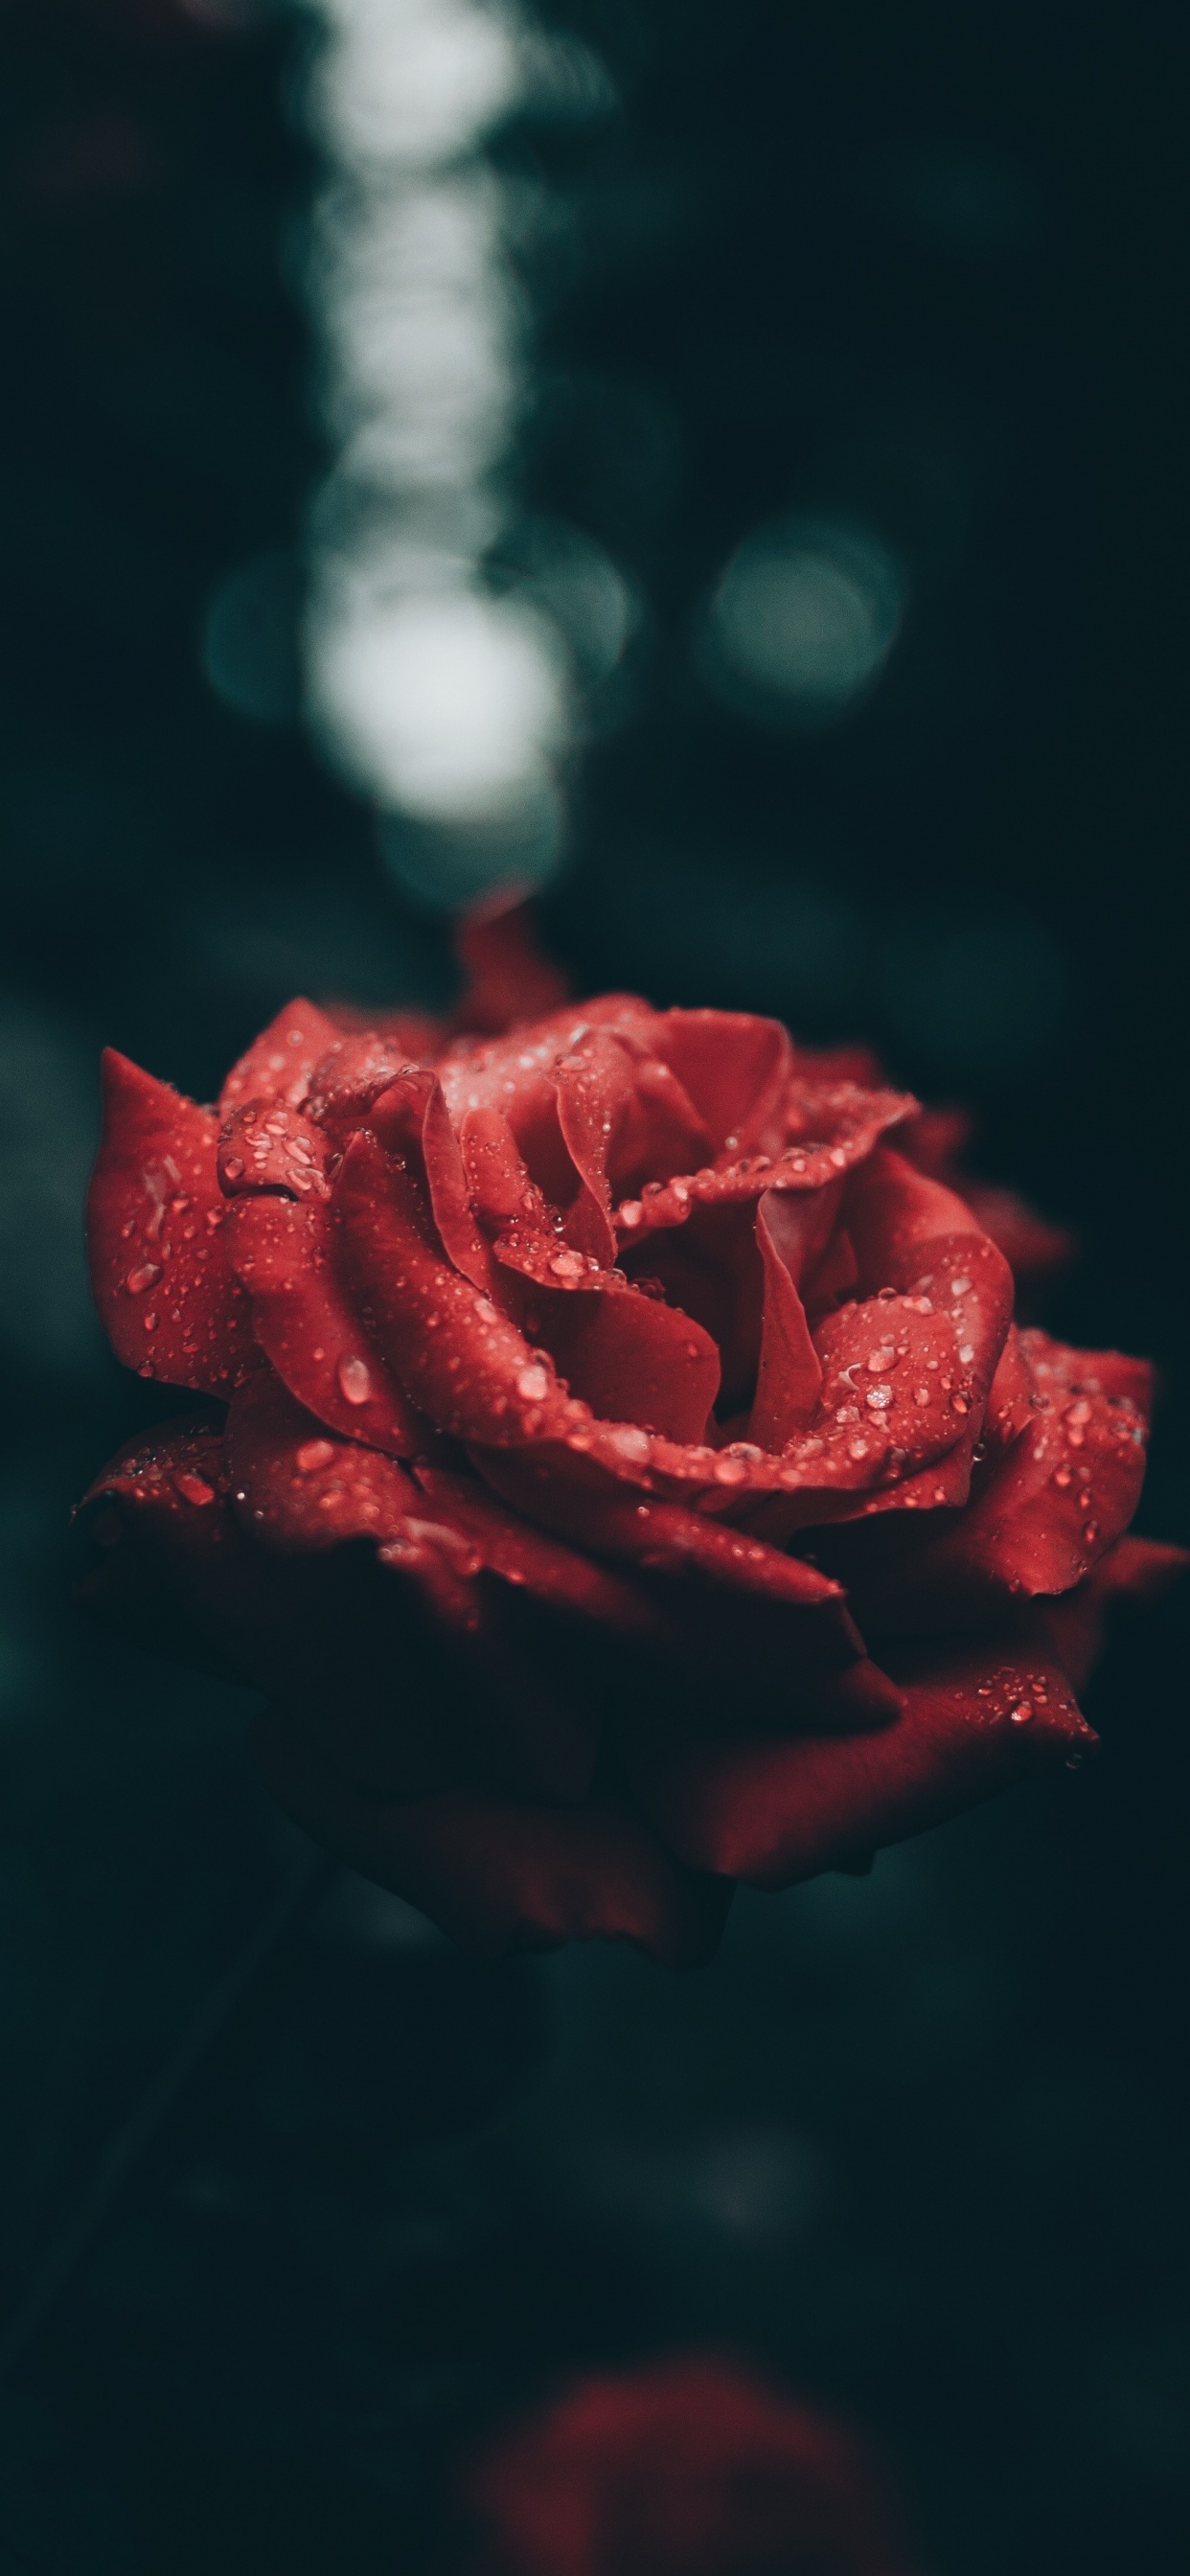 Red Rose in Close up Photography. Wallpaper in 1242x2688 Resolution